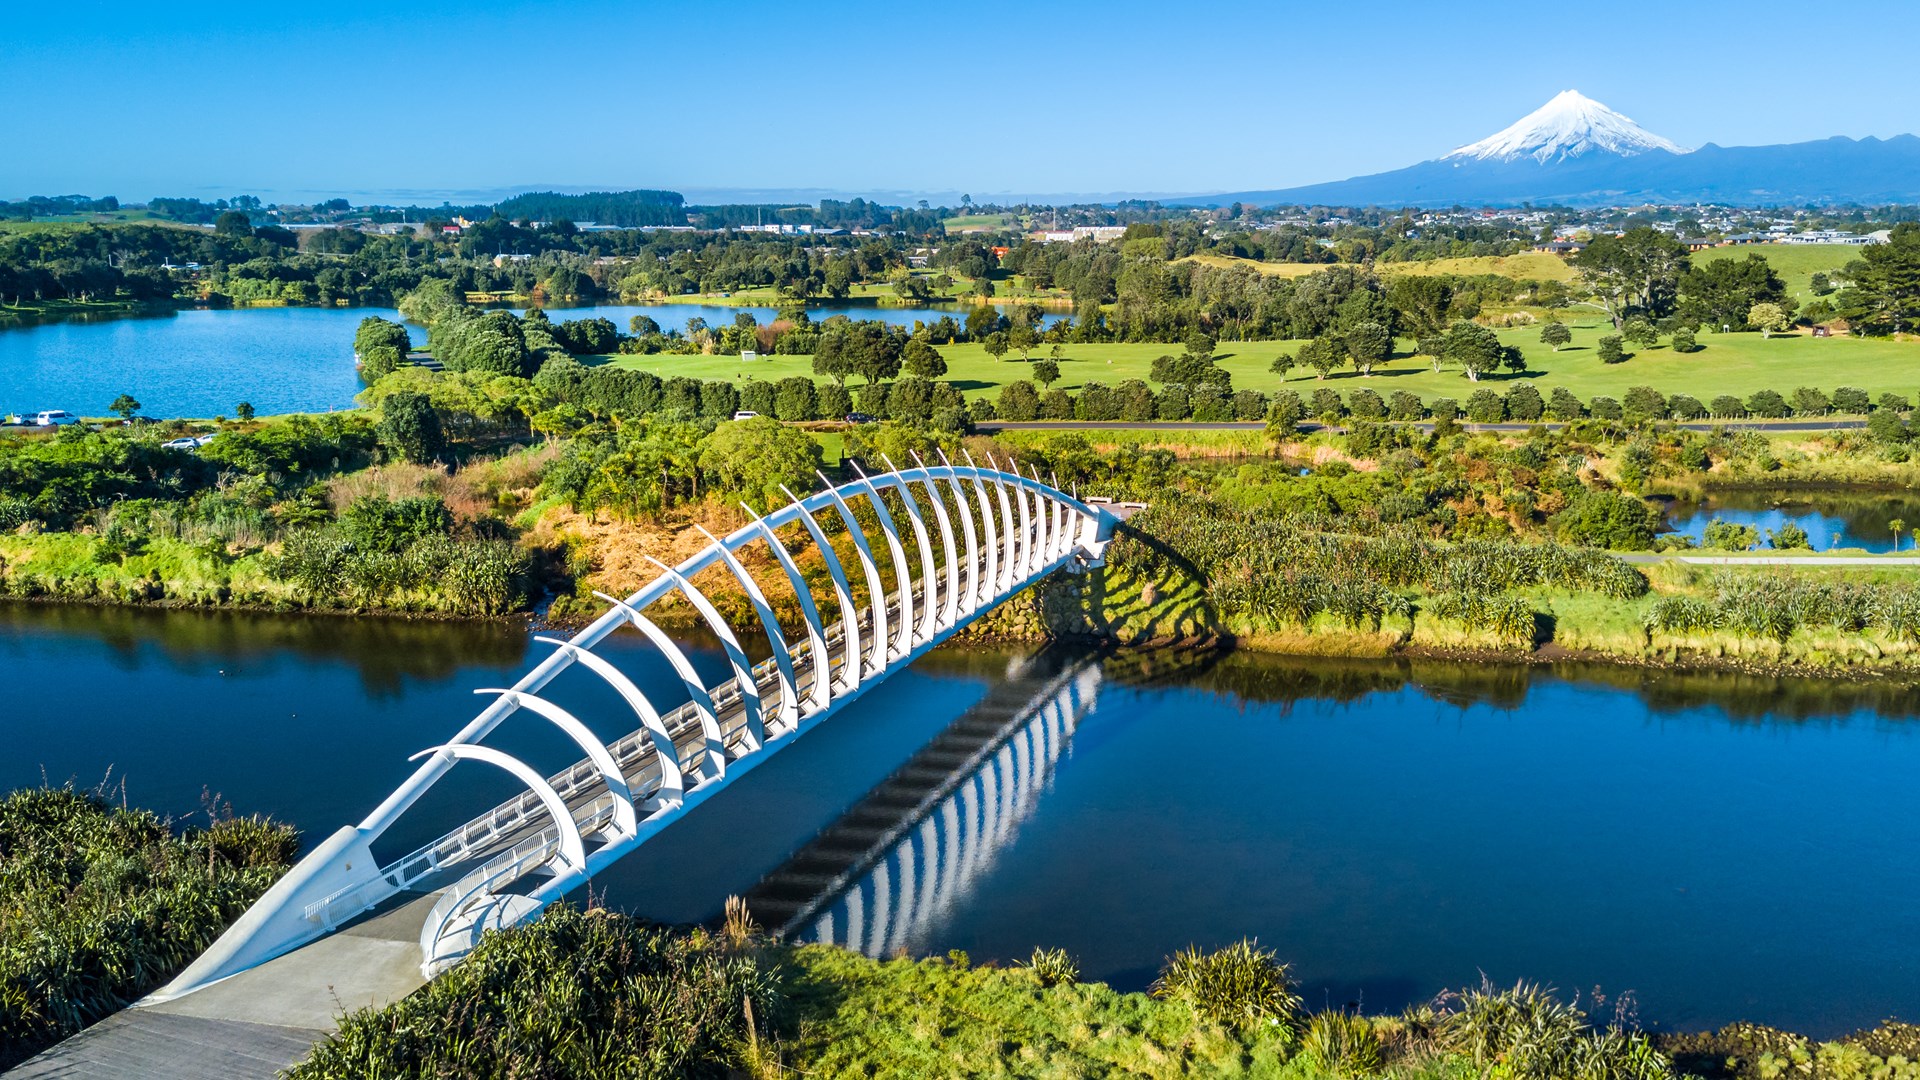 Te Rewa Rewa walking and cycling bridge, which crosses the Waiwhakaiho River in New Plymouth. Source: Dmitri Ogleznev, iStock by Getty Images.